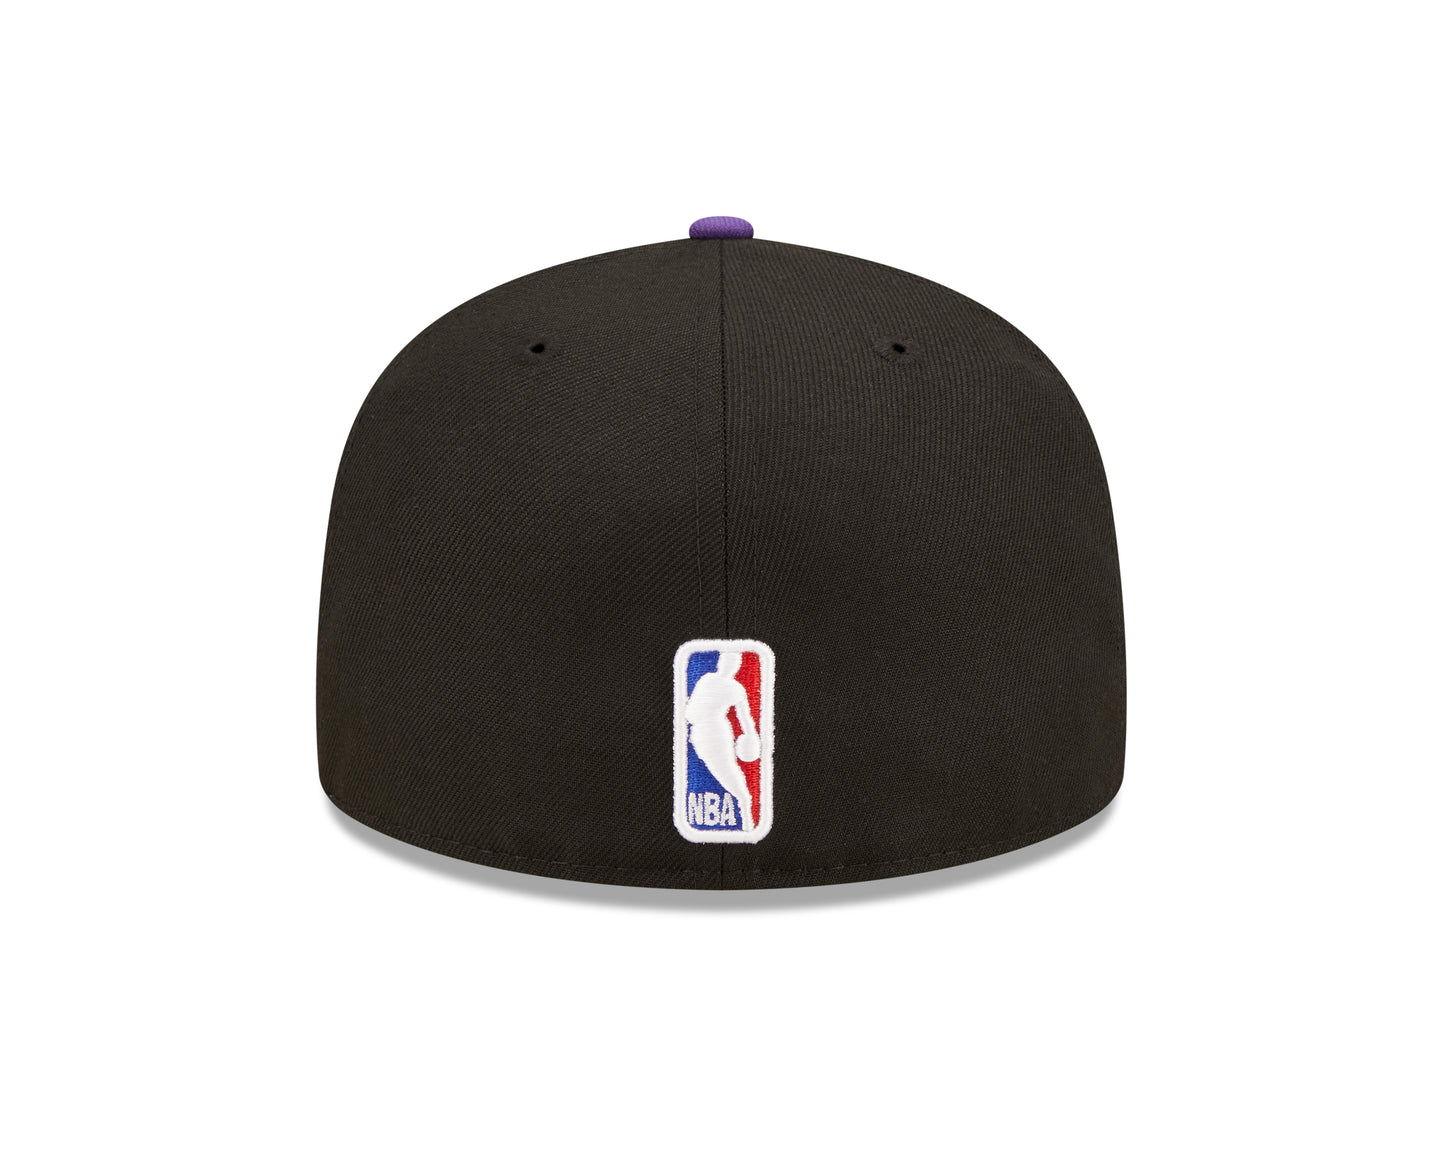 Los Angeles Lakers New Era NBA Tip Off 59fifty Hat - Black